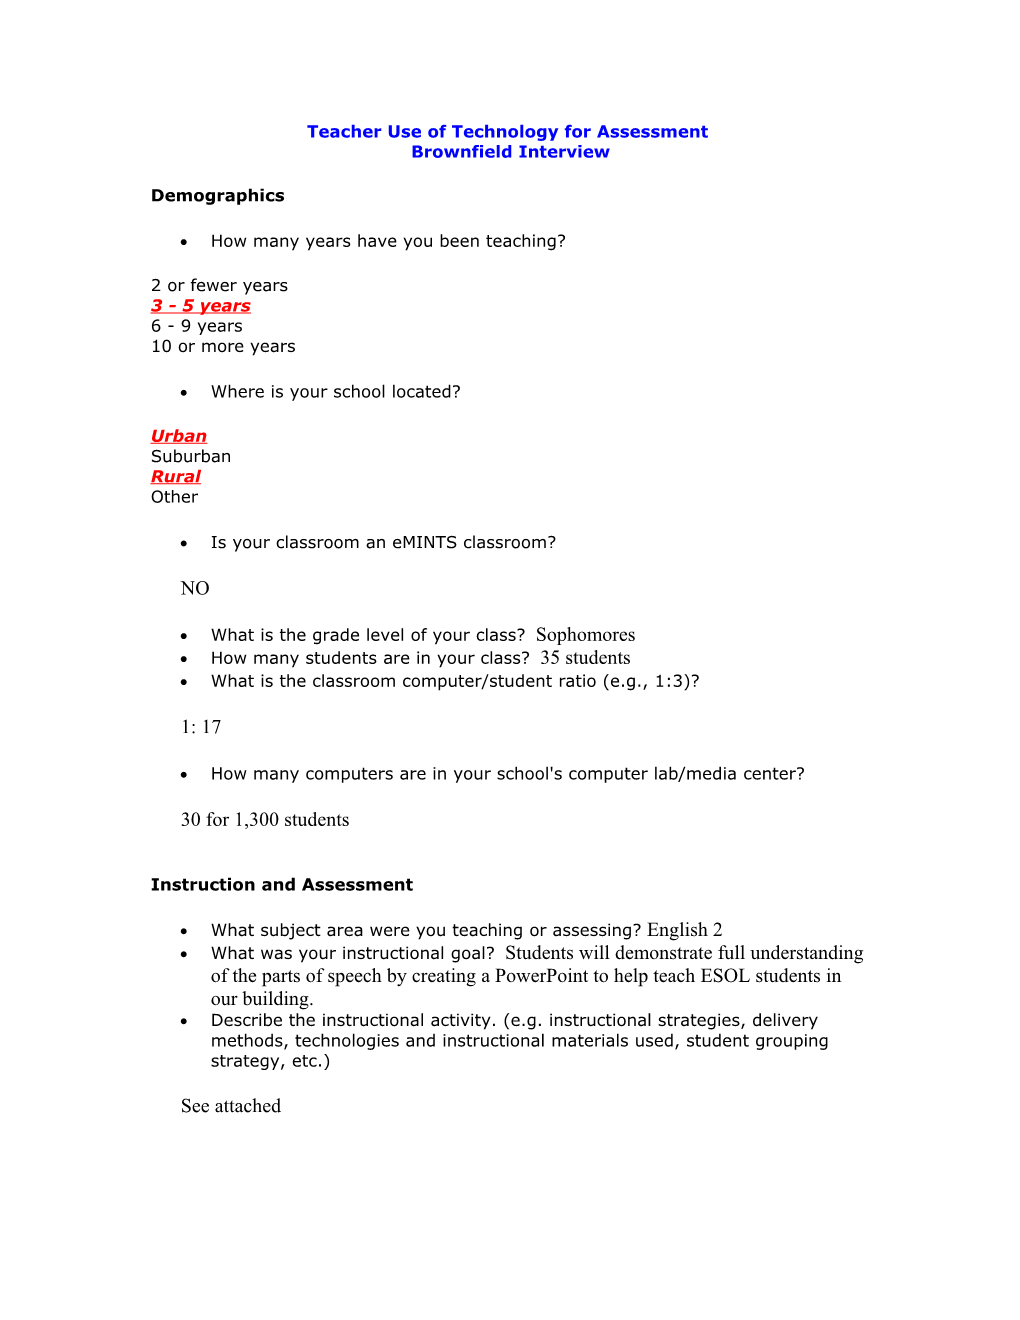 Teacher Use of Technology for Assessment - Submit to Digital Dropbox